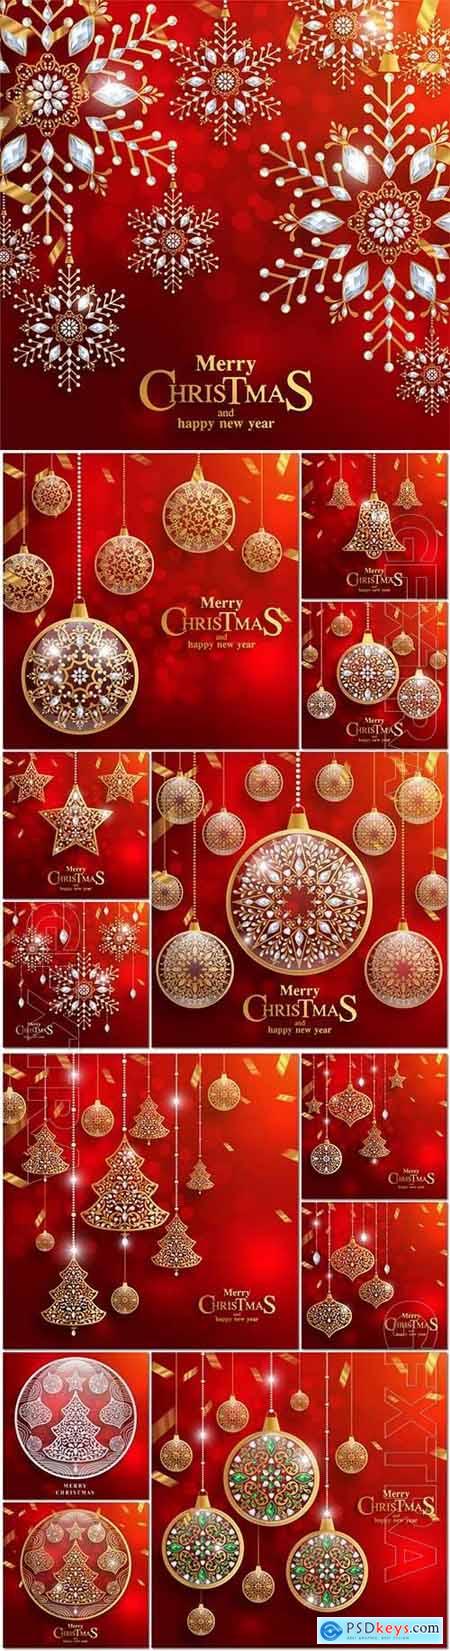 Merry christmas and happy new year with gold patterned and crystals on paper color in vector